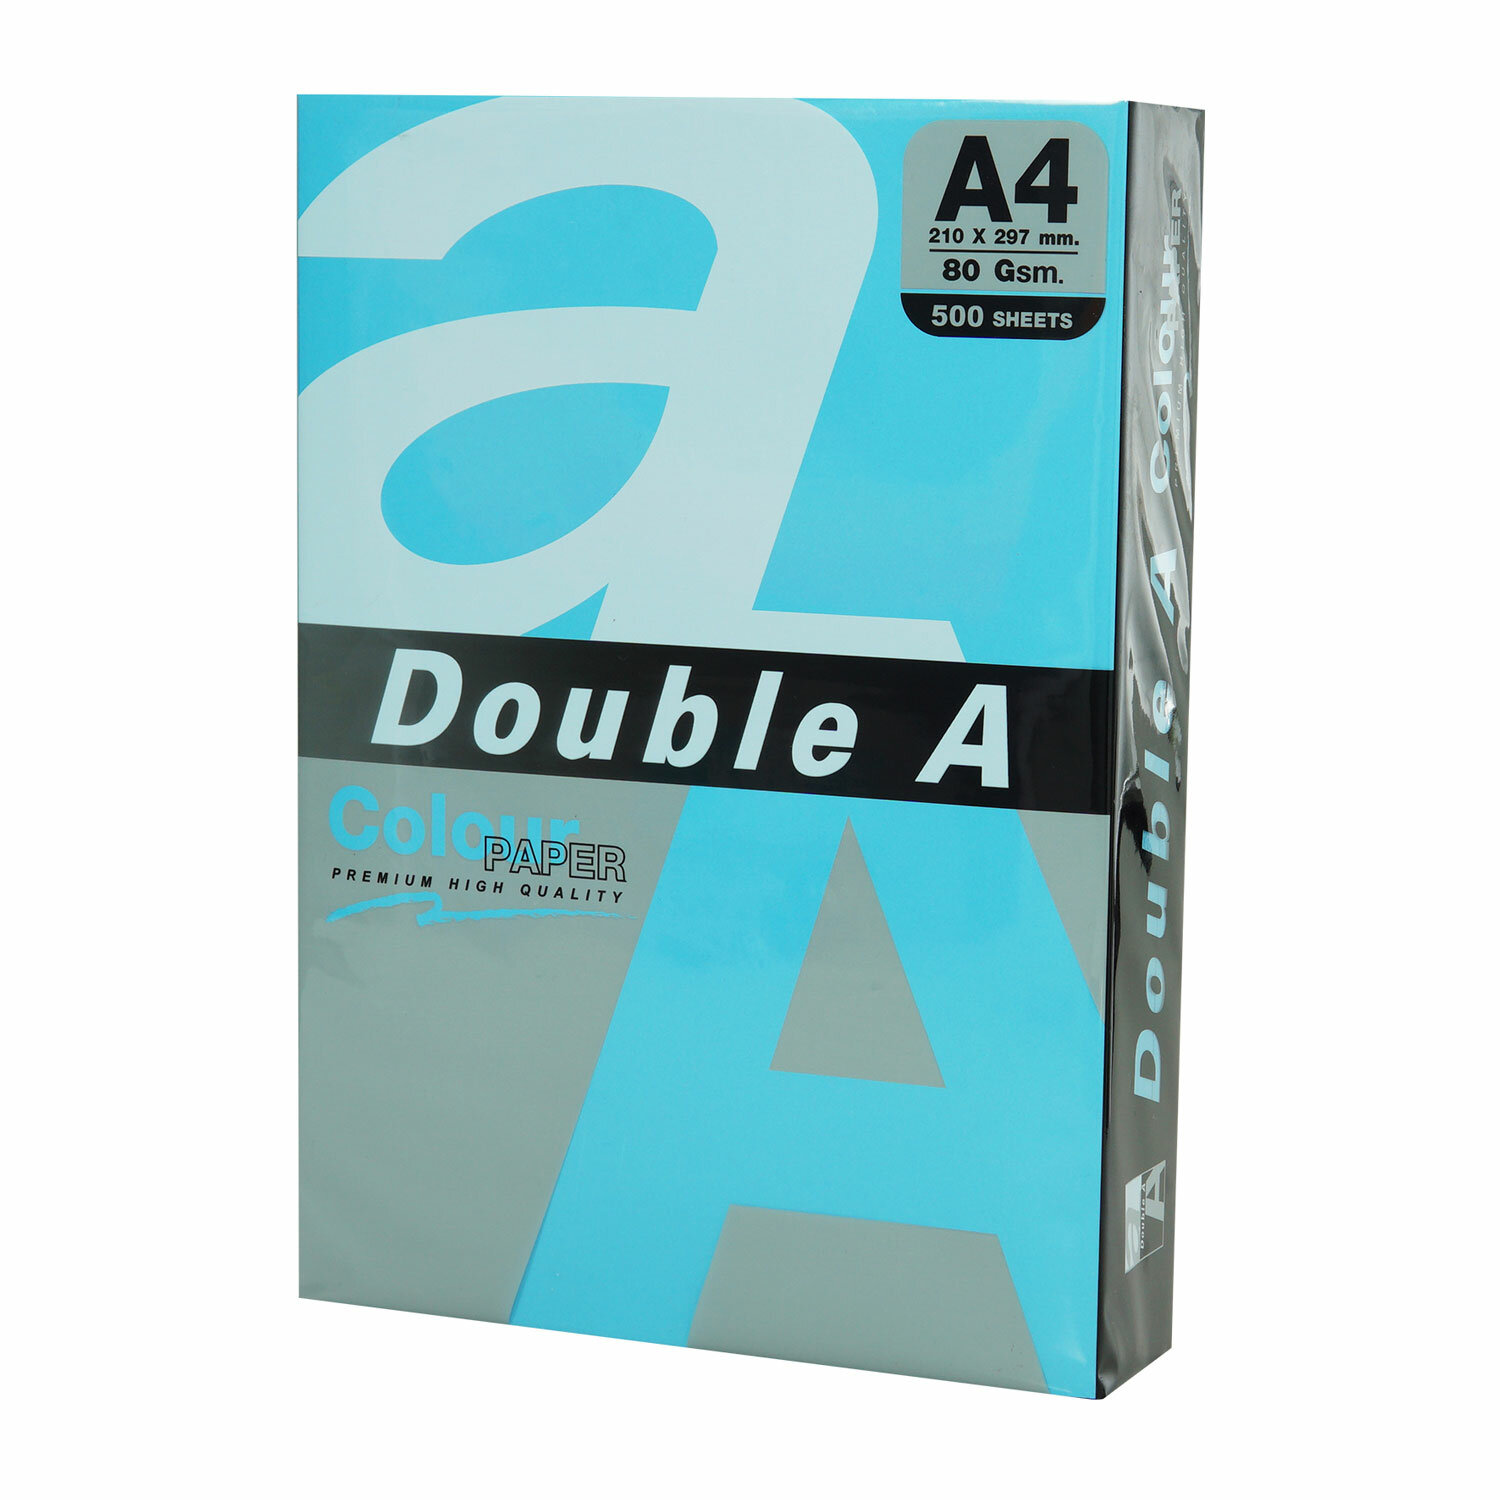 DOUBLE A   DOUBLE A 4, 80 /2, 500 ., , 